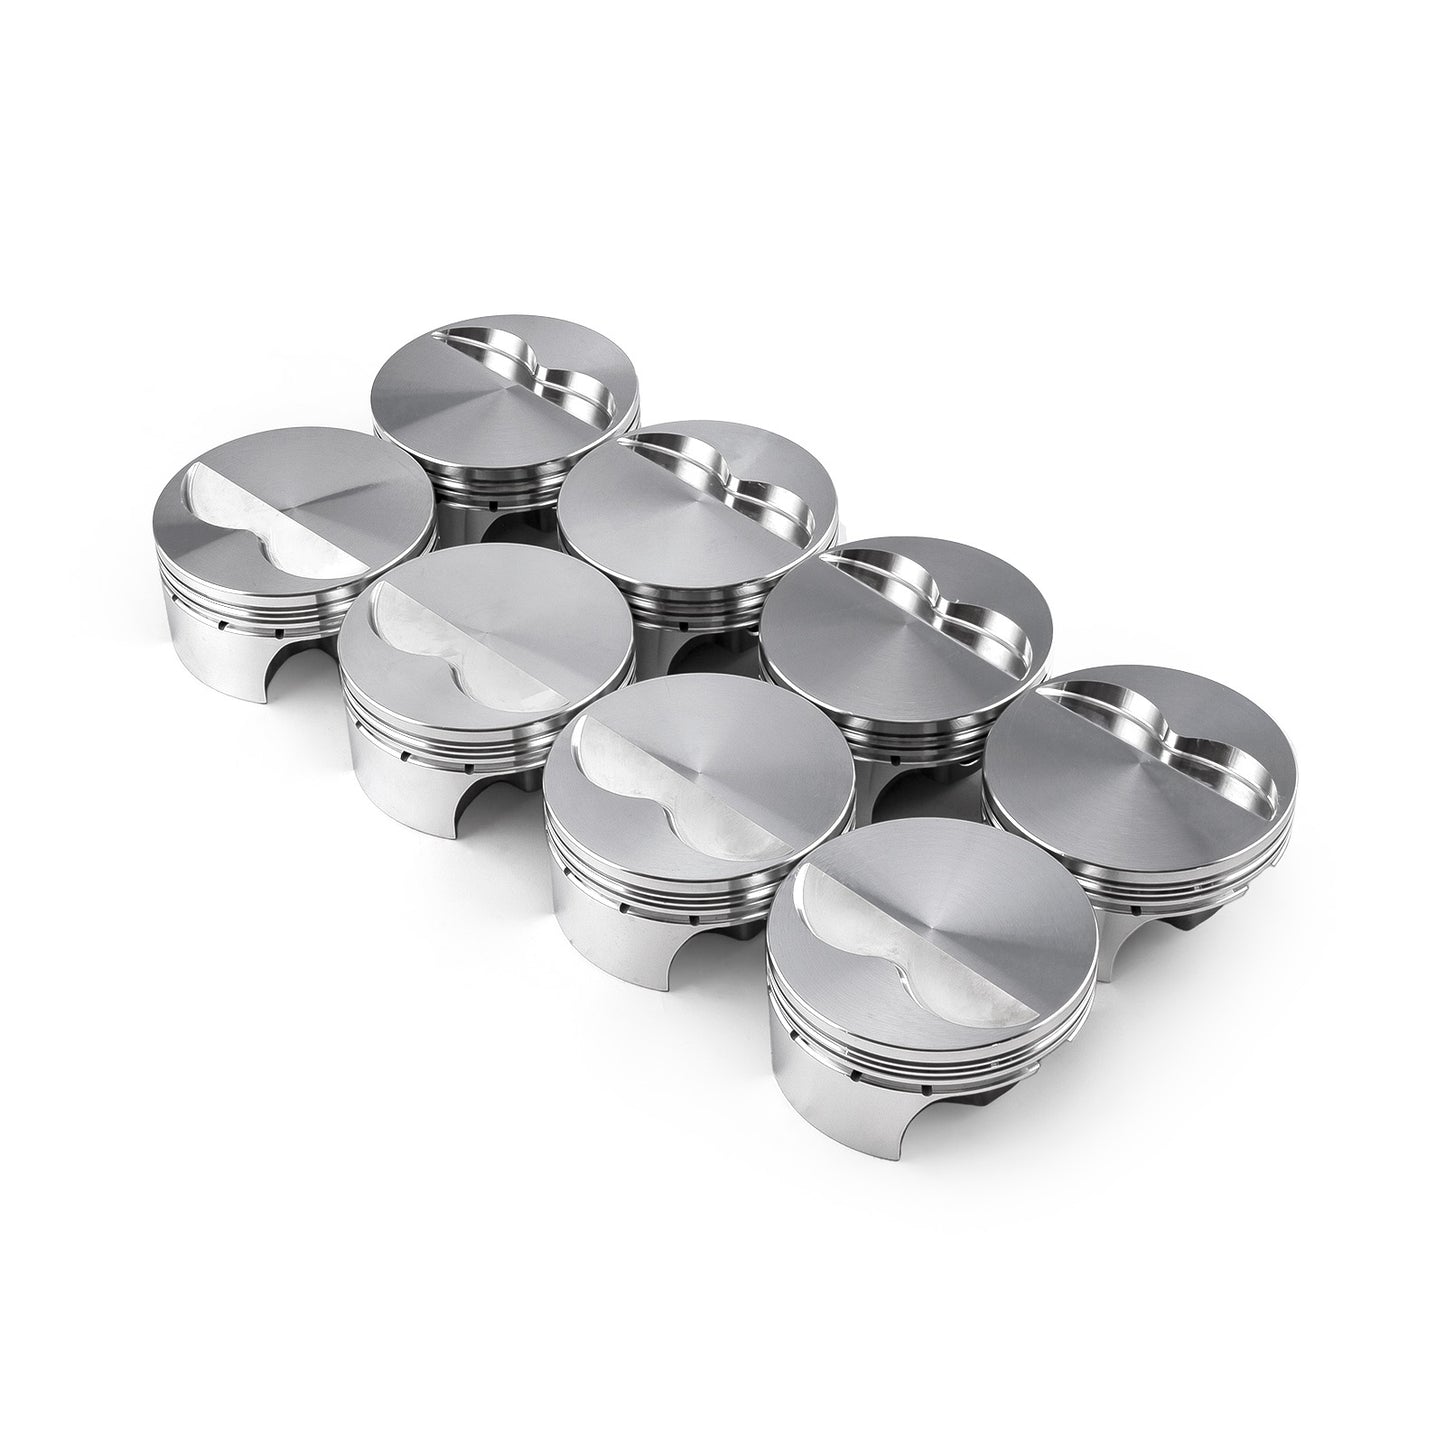 Speedmaster PCE305.1015 Fits Chevy SBC 383 Ci 6.0" 4.000" 1.100" 0.927" Flat Top Forged Pistons